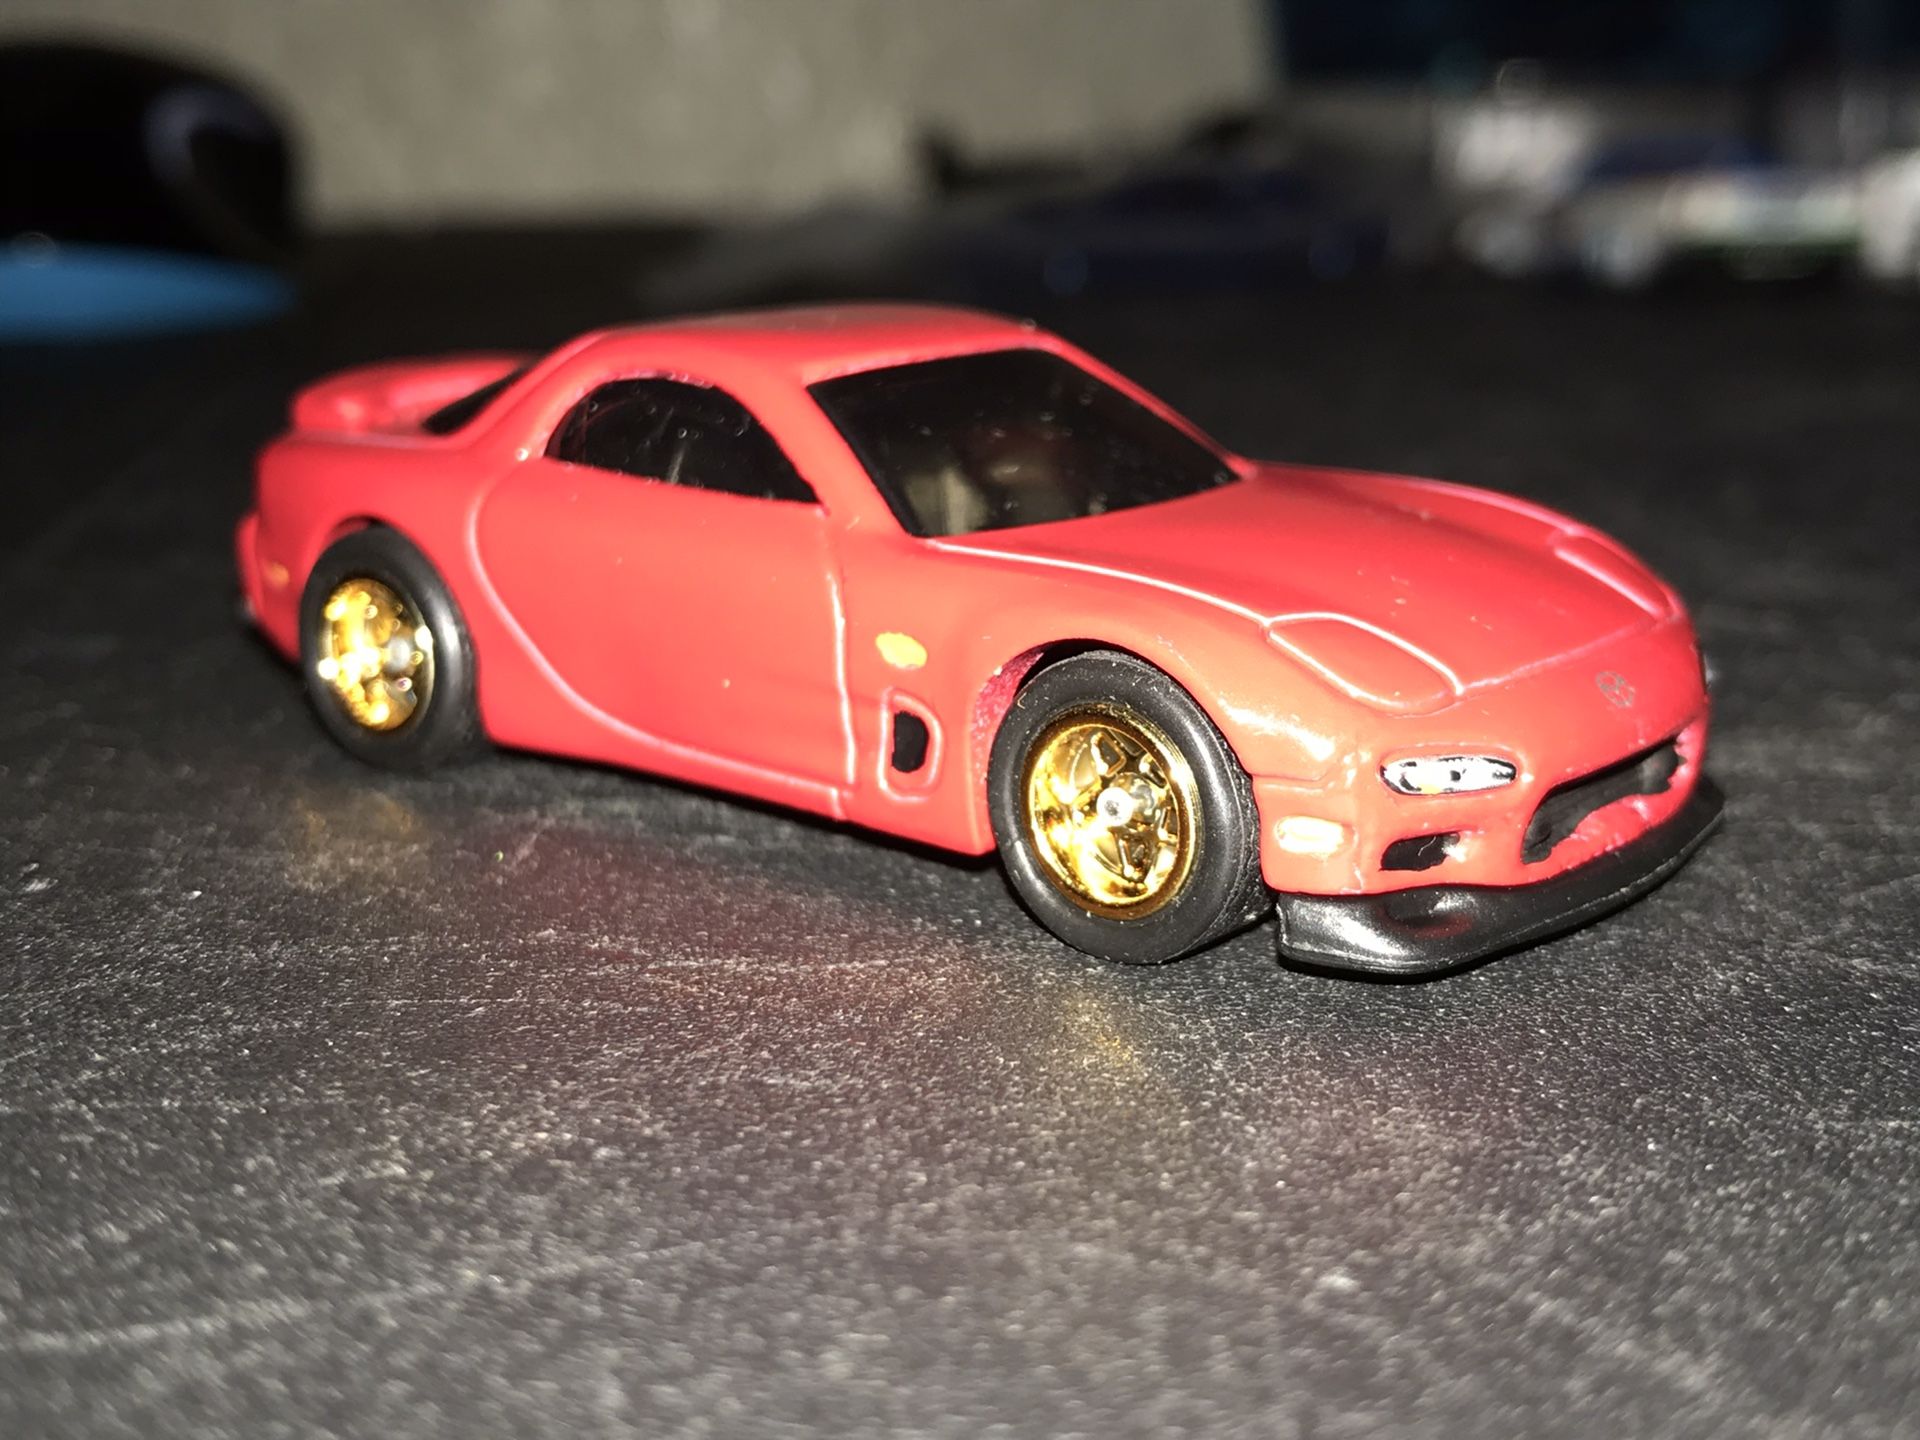 Hot wheels kmart red mazda rx7 with star spoke rims